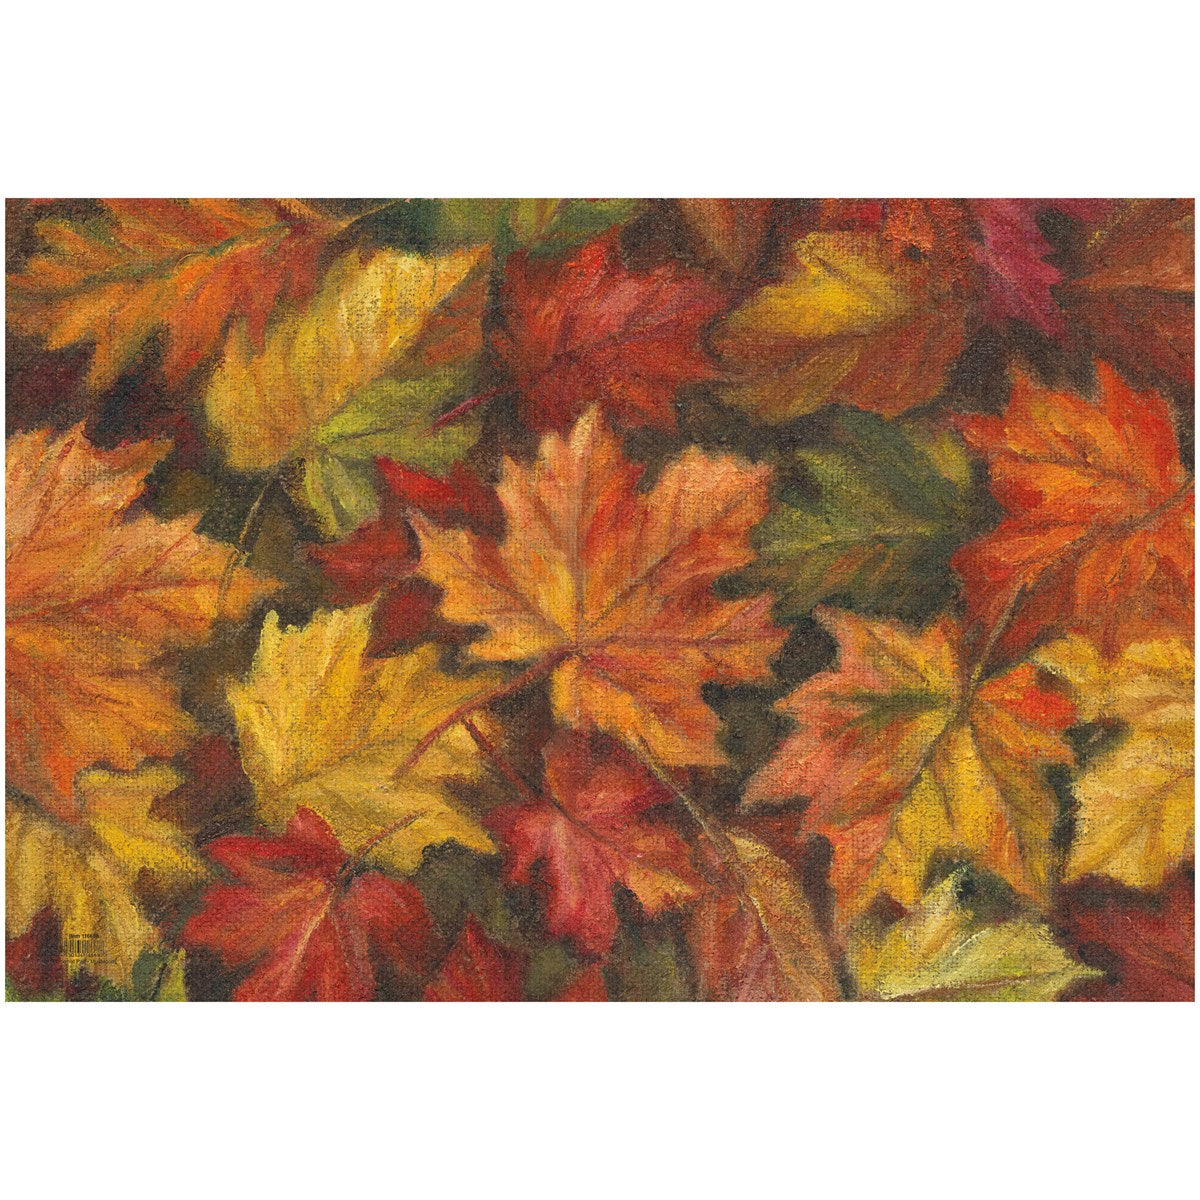 Fall Leaves Paper Placemat Pad of 24